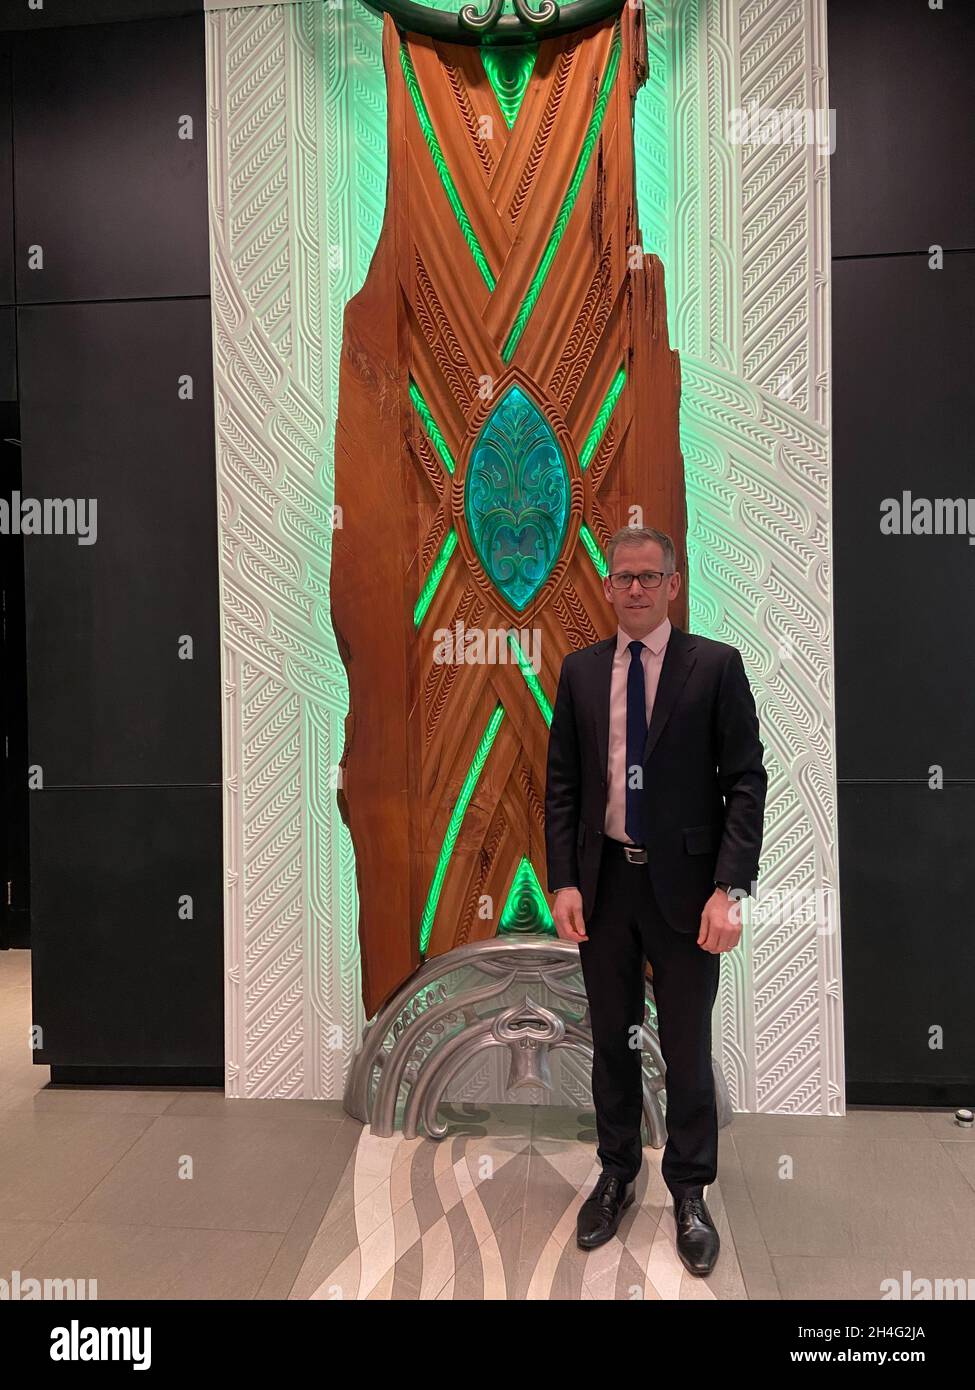 Assistant Governor Christian Hawkesby stands with an art installation of Maori forest god Tane Mahuta at the lobby of New Zealand's Central Bank building in Wellington, New Zealand September 22, 2021. Picture taken September 22, 2021. REUTERS/Praveen Menon Stock Photo